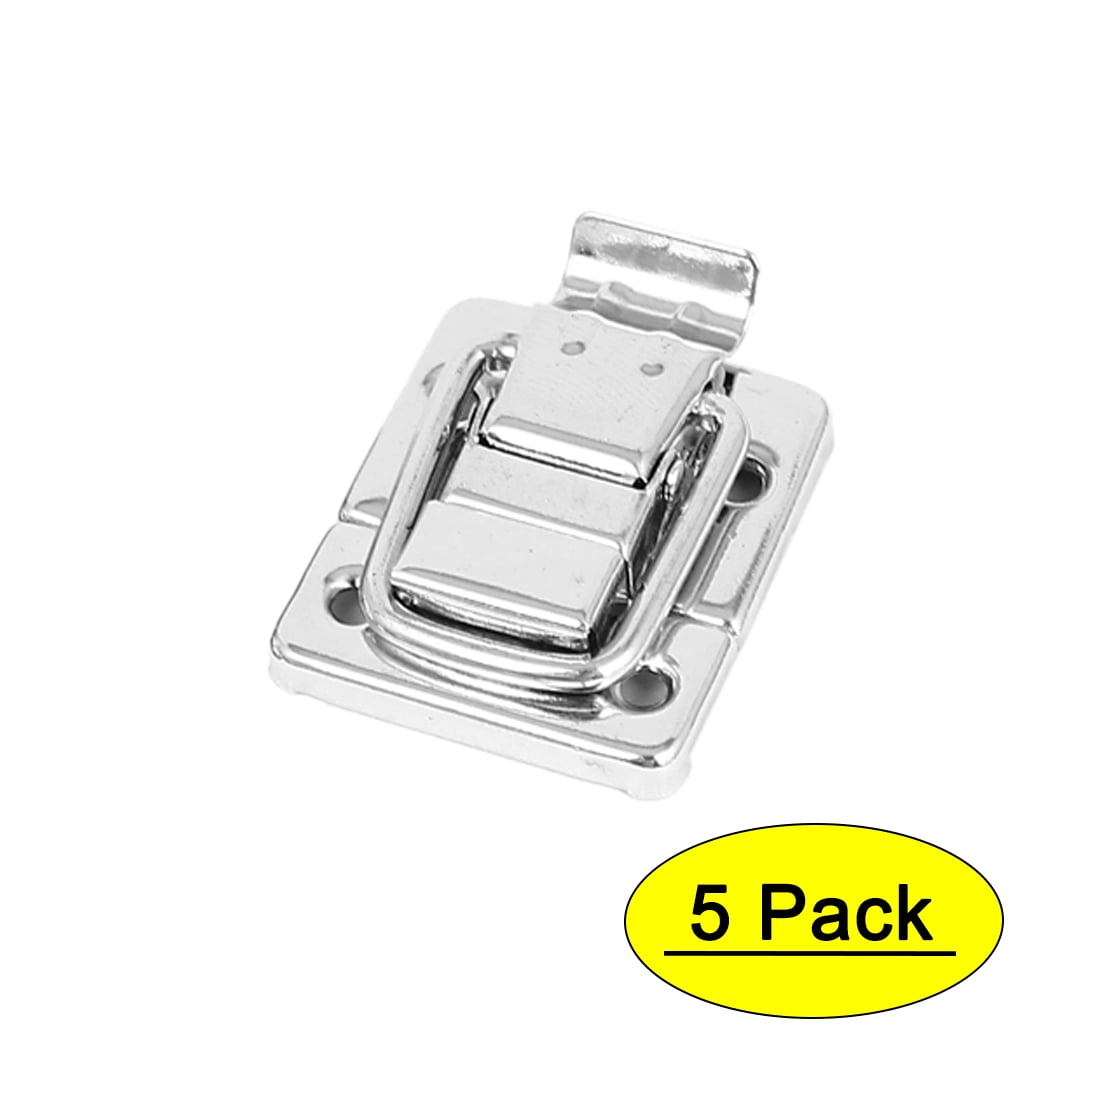 lever closures pack of 1 iron bolt clamps 90 mm in length for box box boot captures 